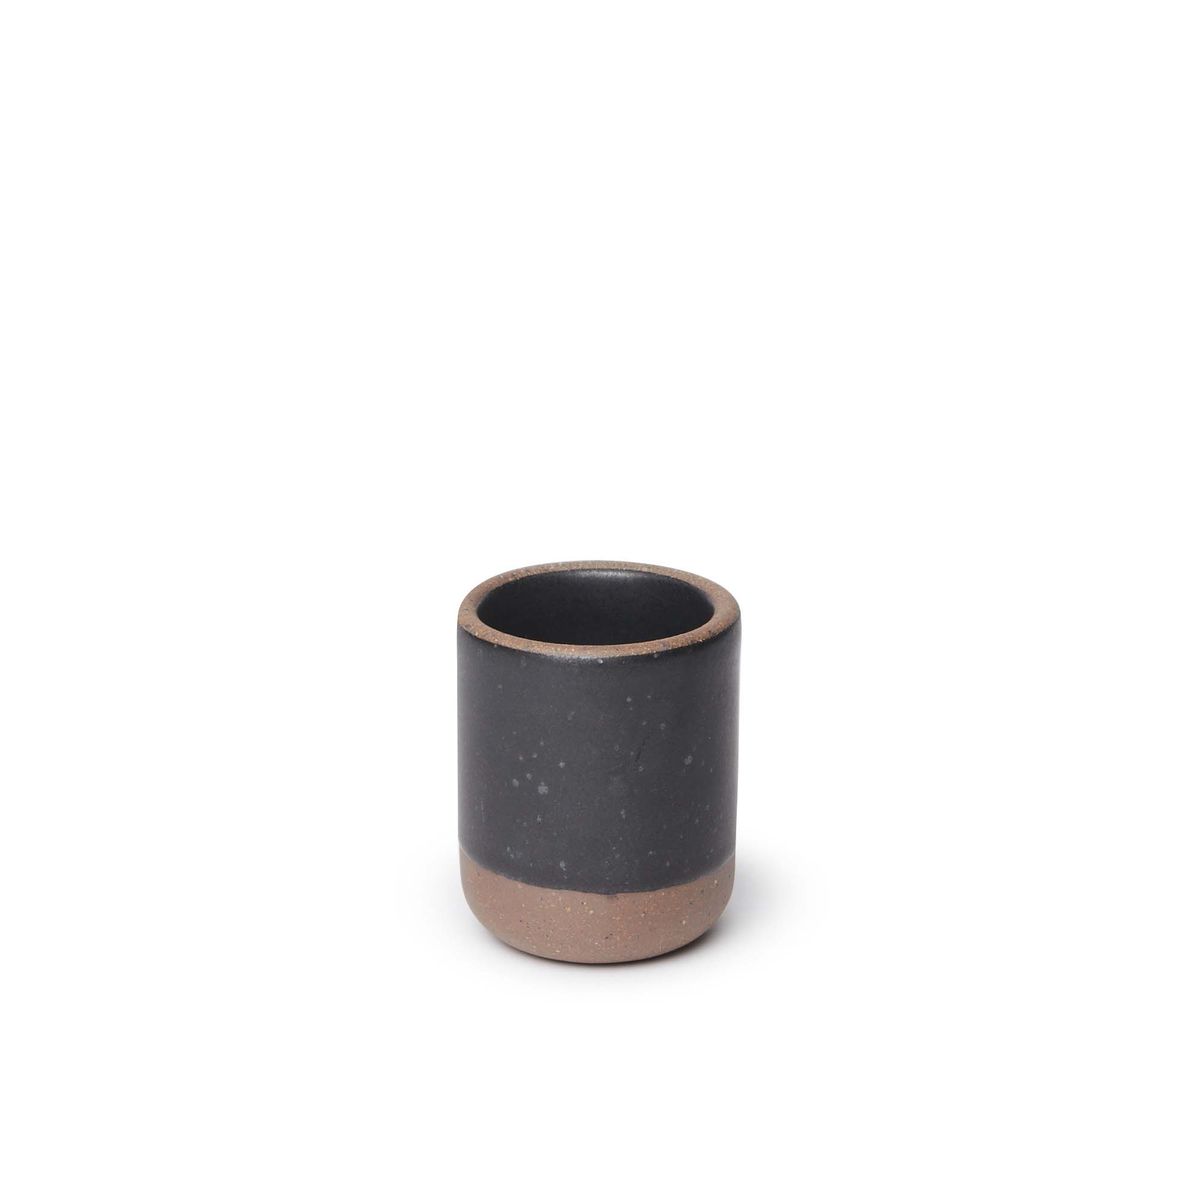 A small, short ceramic mug cup in a graphite black color featuring iron speckles and unglazed rim and bottom base.